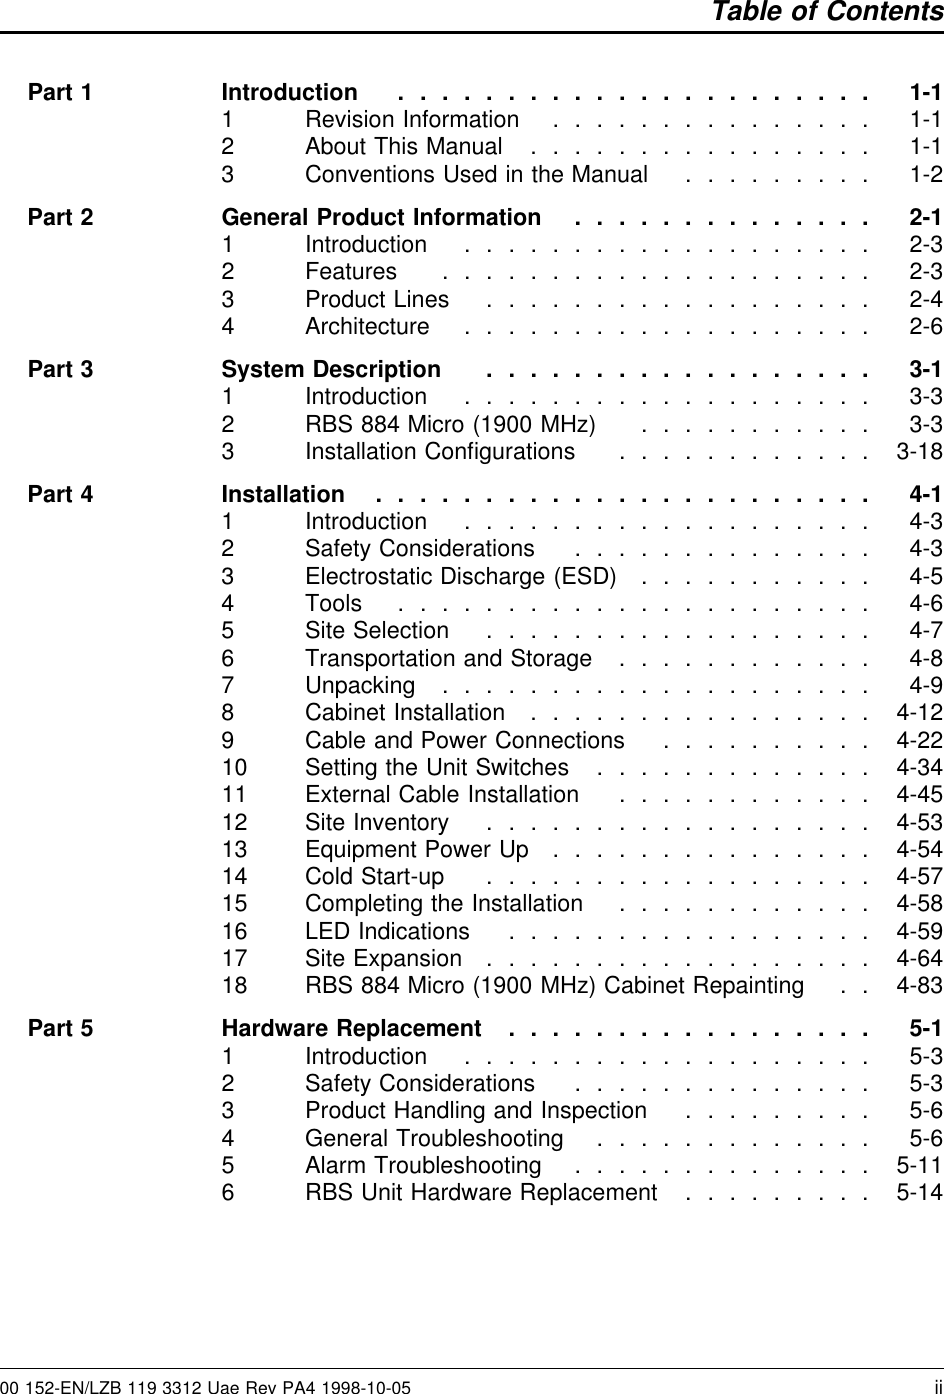 Table of ContentsPart 1 Introduction . ..................... 1-11 Revision Information . . . ............ 1-12 About This Manual ................ 1-13 Conventions Used in the Manual . ........ 1-2Part 2 General Product Information . . ............ 2-11 Introduction . . ................. 2-32 Features . . . ................. 2-33 Product Lines . ................. 2-44 Architecture . . ................. 2-6Part 3 System Description . ................. 3-11 Introduction . . ................. 3-32 RBS 884 Micro (1900 MHz) . . . ........ 3-33 Installation Conﬁgurations ............ 3-18Part 4 Installation . . ..................... 4-11 Introduction . . ................. 4-32 Safety Considerations . . ............ 4-33 Electrostatic Discharge (ESD) . . . ........ 4-54 Tools . ..................... 4-65 Site Selection . ................. 4-76 Transportation and Storage ............ 4-87 Unpacking . . . ................. 4-98 Cabinet Installation ................ 4-129 Cable and Power Connections . . ........ 4-2210 Setting the Unit Switches . ............ 4-3411 External Cable Installation ............ 4-4512 Site Inventory . ................. 4-5313 Equipment Power Up . . . ............ 4-5414 Cold Start-up . ................. 4-5715 Completing the Installation ............ 4-5816 LED Indications ................. 4-5917 Site Expansion . ................. 4-6418 RBS 884 Micro (1900 MHz) Cabinet Repainting . . 4-83Part 5 Hardware Replacement ................. 5-11 Introduction . . ................. 5-32 Safety Considerations . . ............ 5-33 Product Handling and Inspection . ........ 5-64 General Troubleshooting . ............ 5-65 Alarm Troubleshooting . . ............ 5-116 RBS Unit Hardware Replacement . ........ 5-1400 152-EN/LZB 119 3312 Uae Rev PA4 1998-10-05 ii